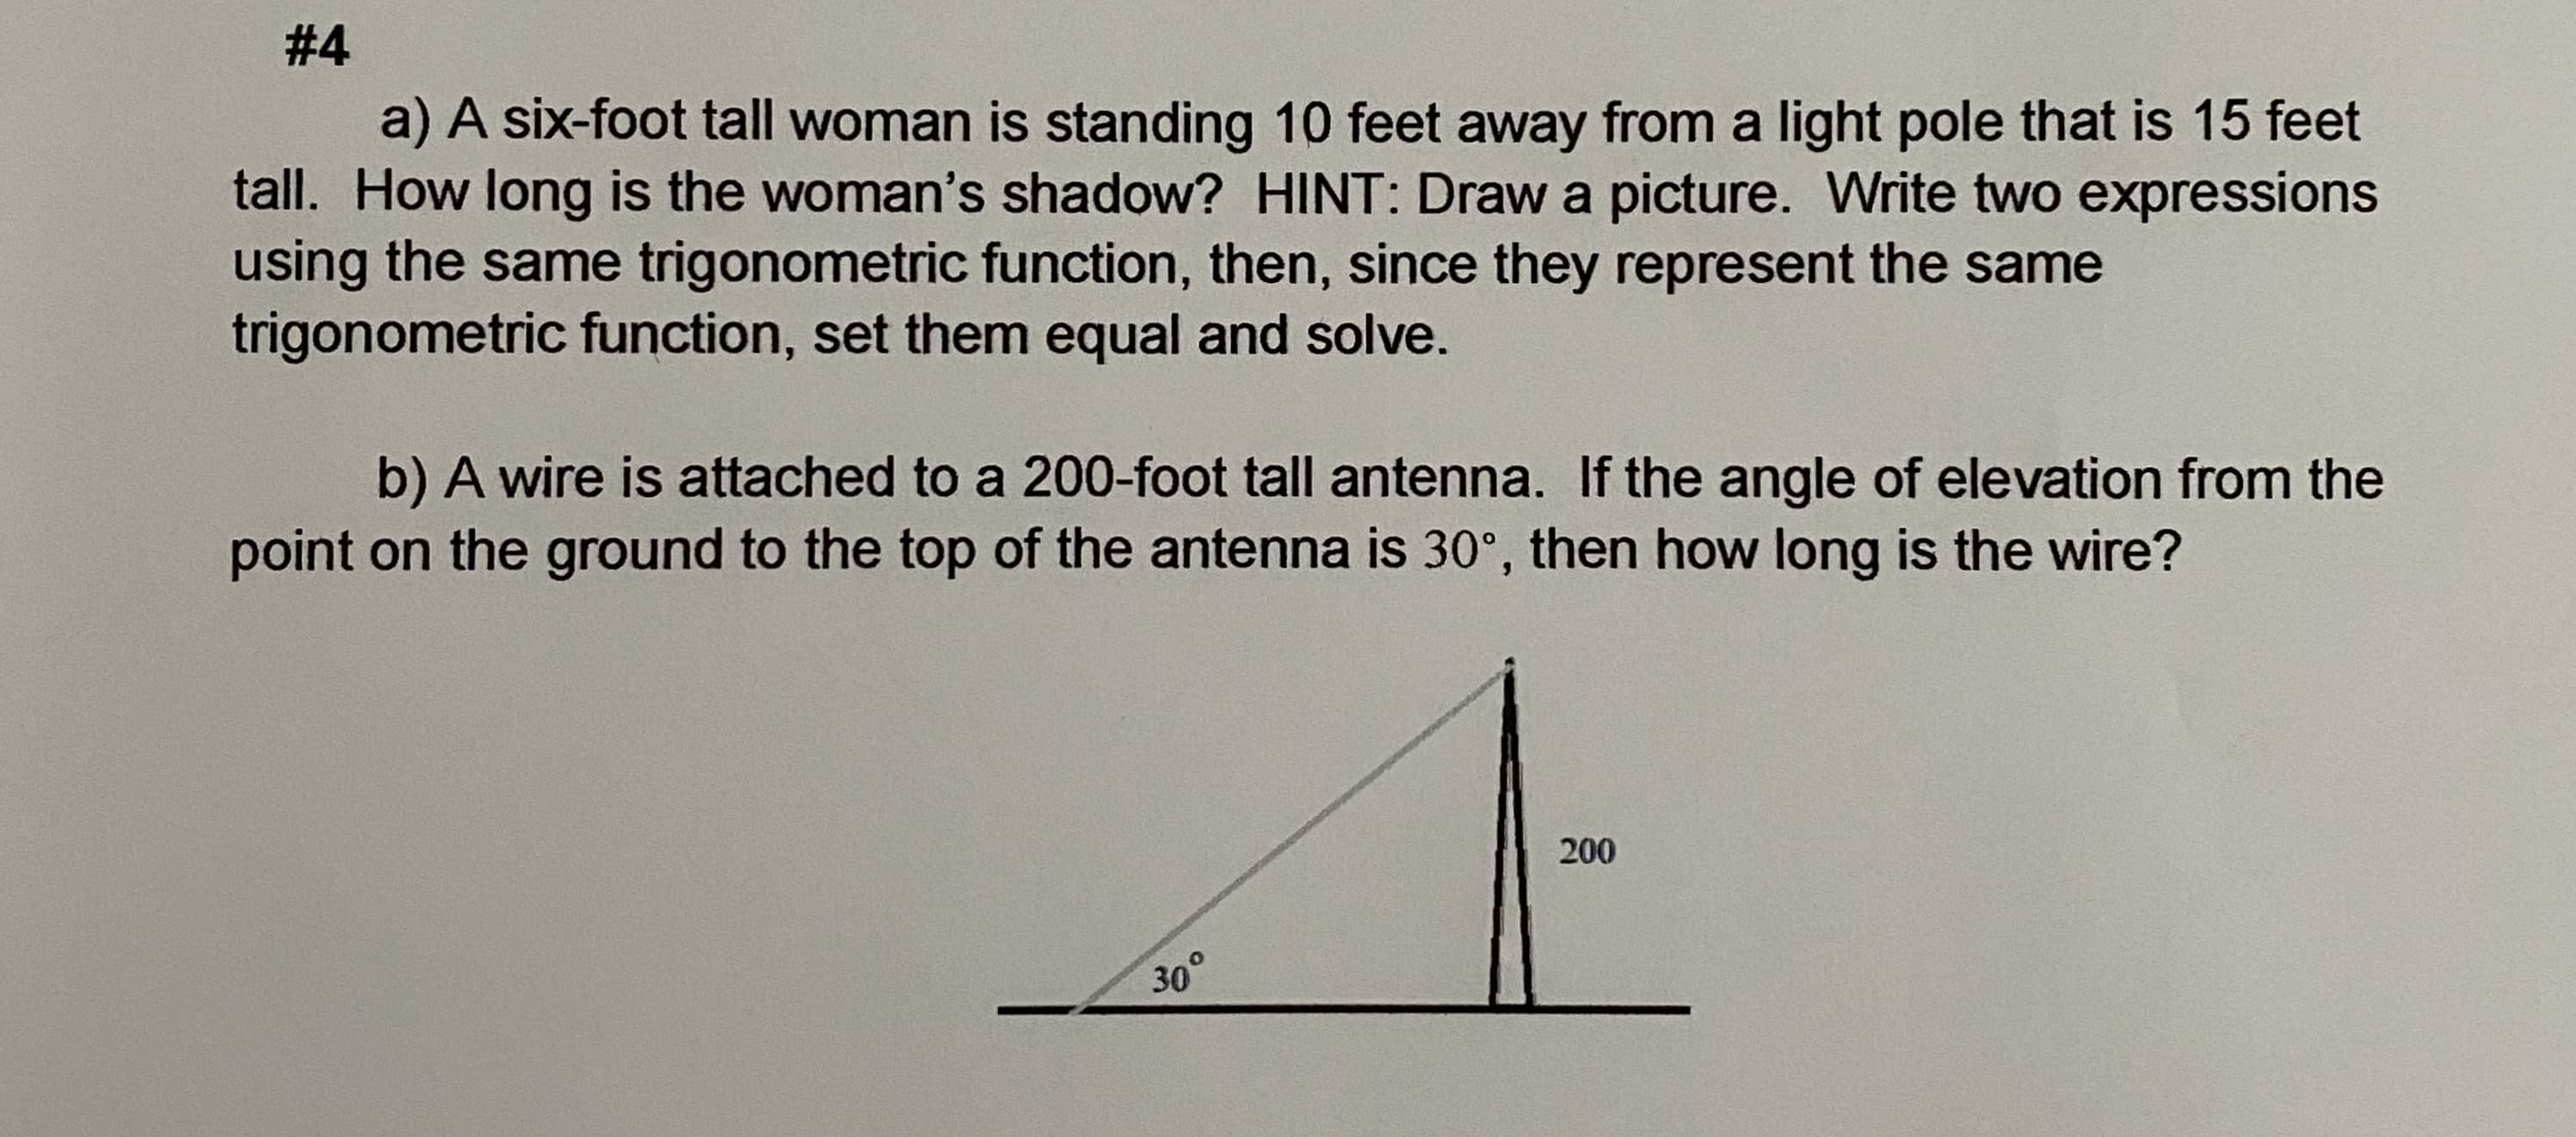 # 4
a) A six-foot tall woman is standing 10 feet away from a light pole that is 15 feet
tall. How long is the woman's shadow? HINT: Draw a picture. Write two expressions
using the same trigonometric function, then, since they represent the same
trigonometric function, set them equal and solve.
b) A wire is attached to a 200-foot tall antenna. If the angle of elevation from the
point on the ground to the top of the antenna is 30°, then how long is the wire?
200
30
